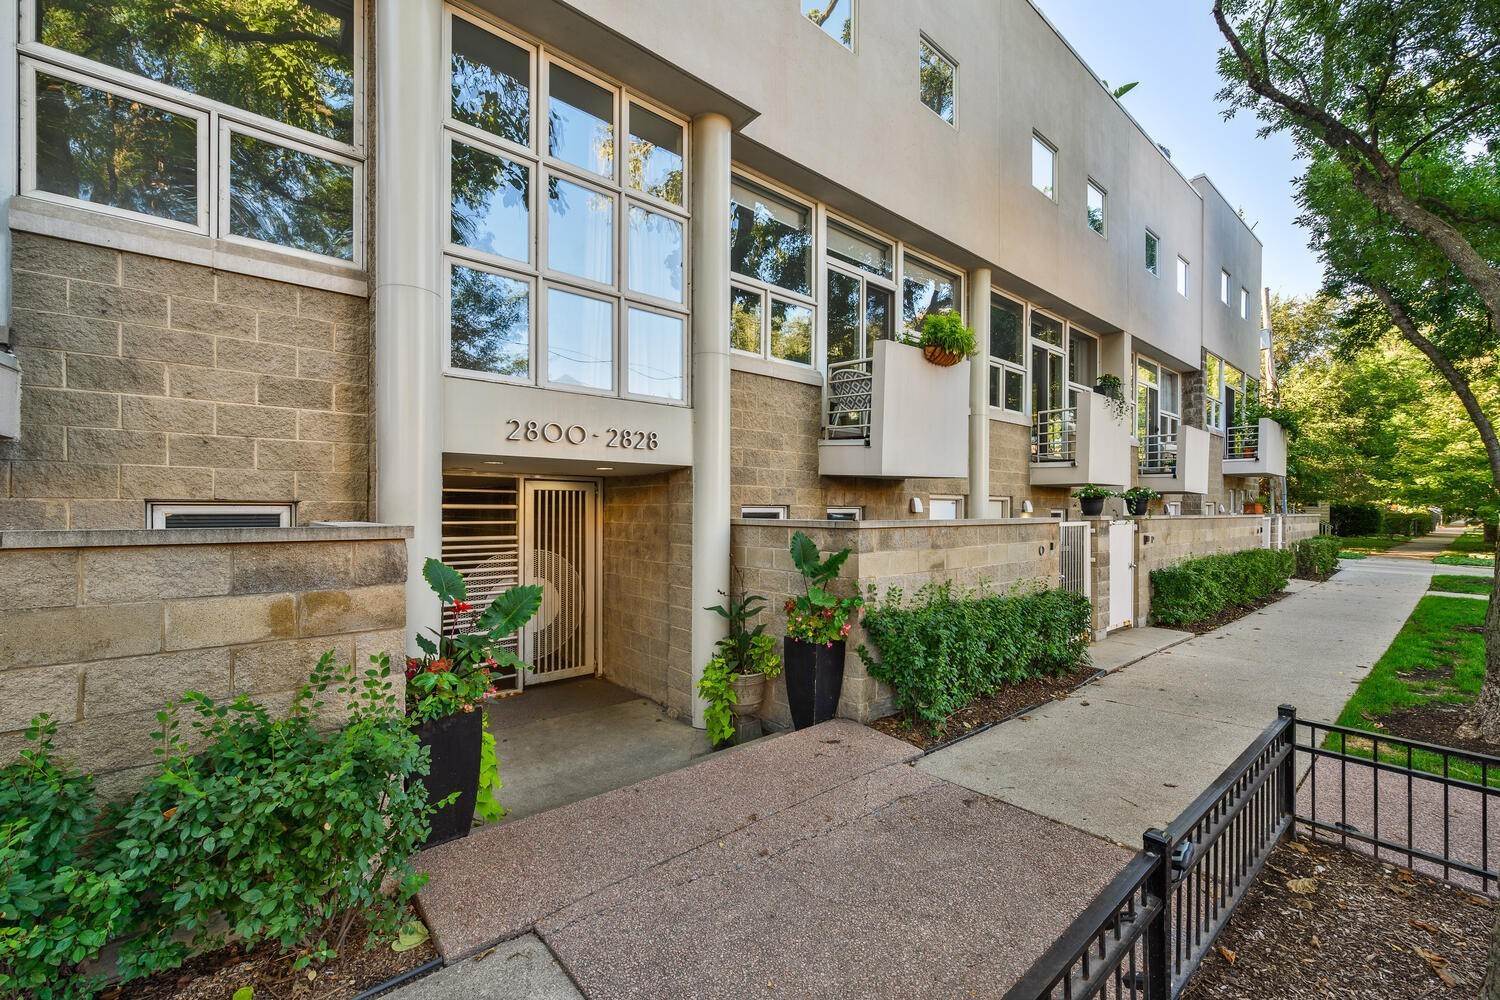 Townhouse at Avondale, Chicago, IL 60618